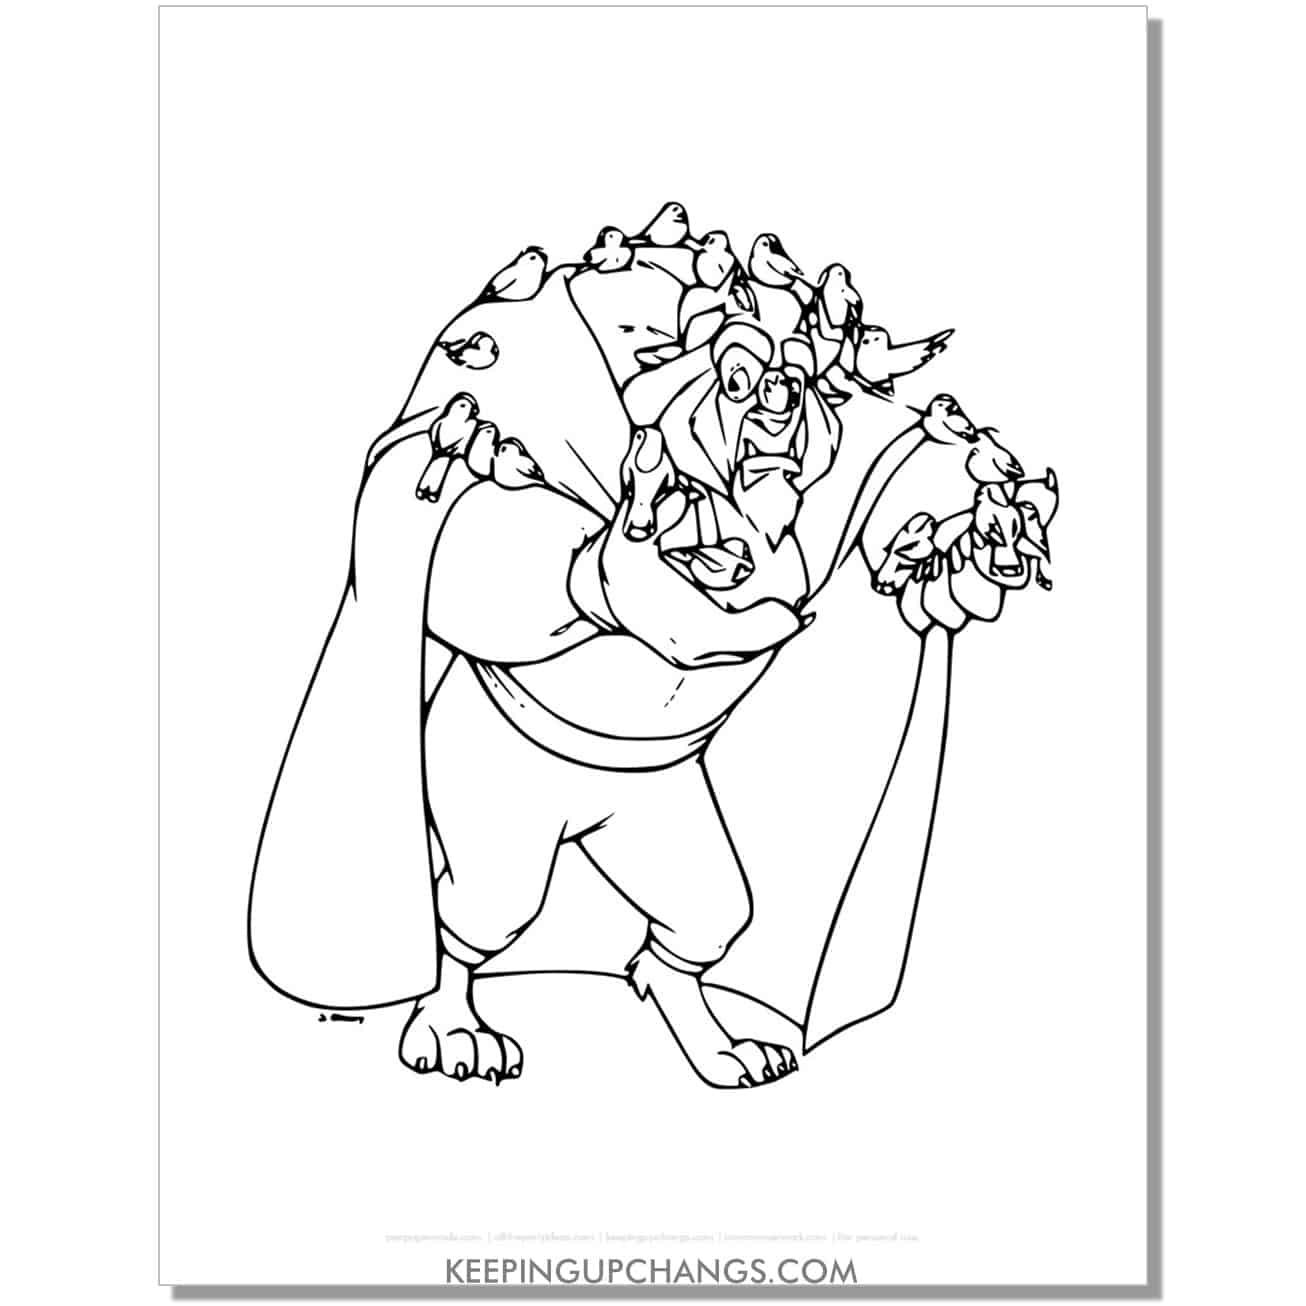 beast covered in birds coloring page, sheet.